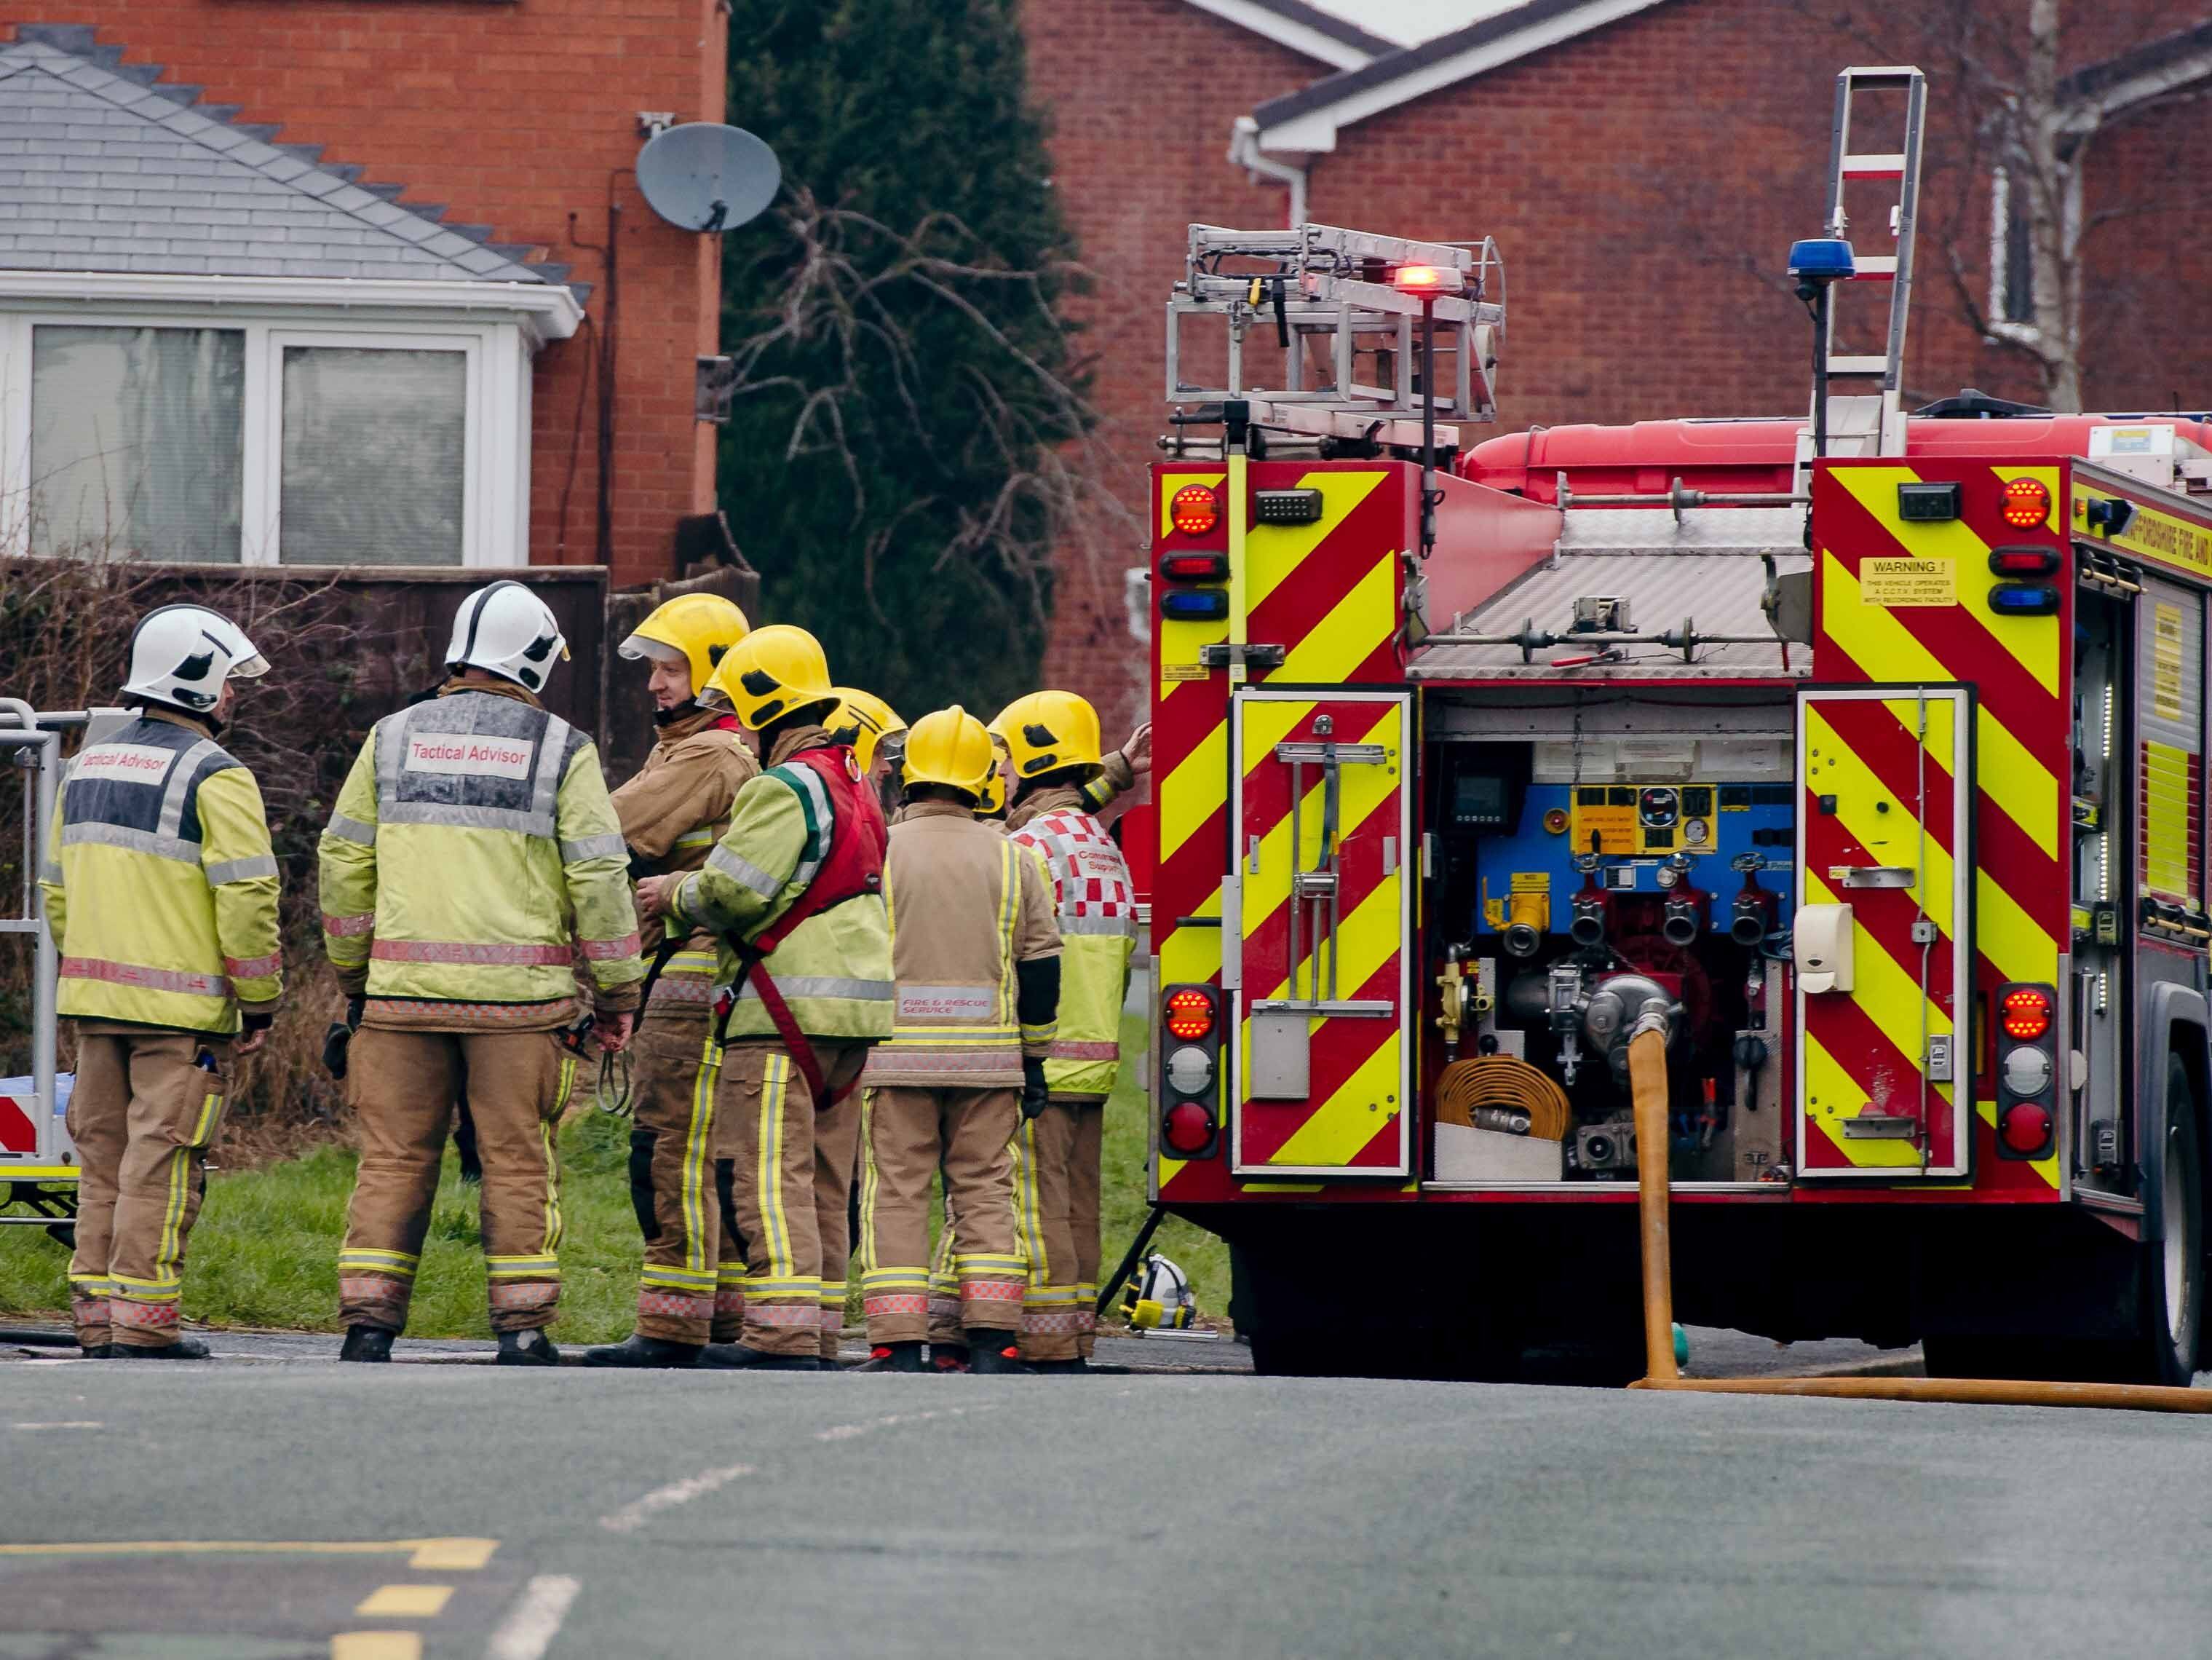 Elderly man dies in house fire as crews force entry to fight blaze